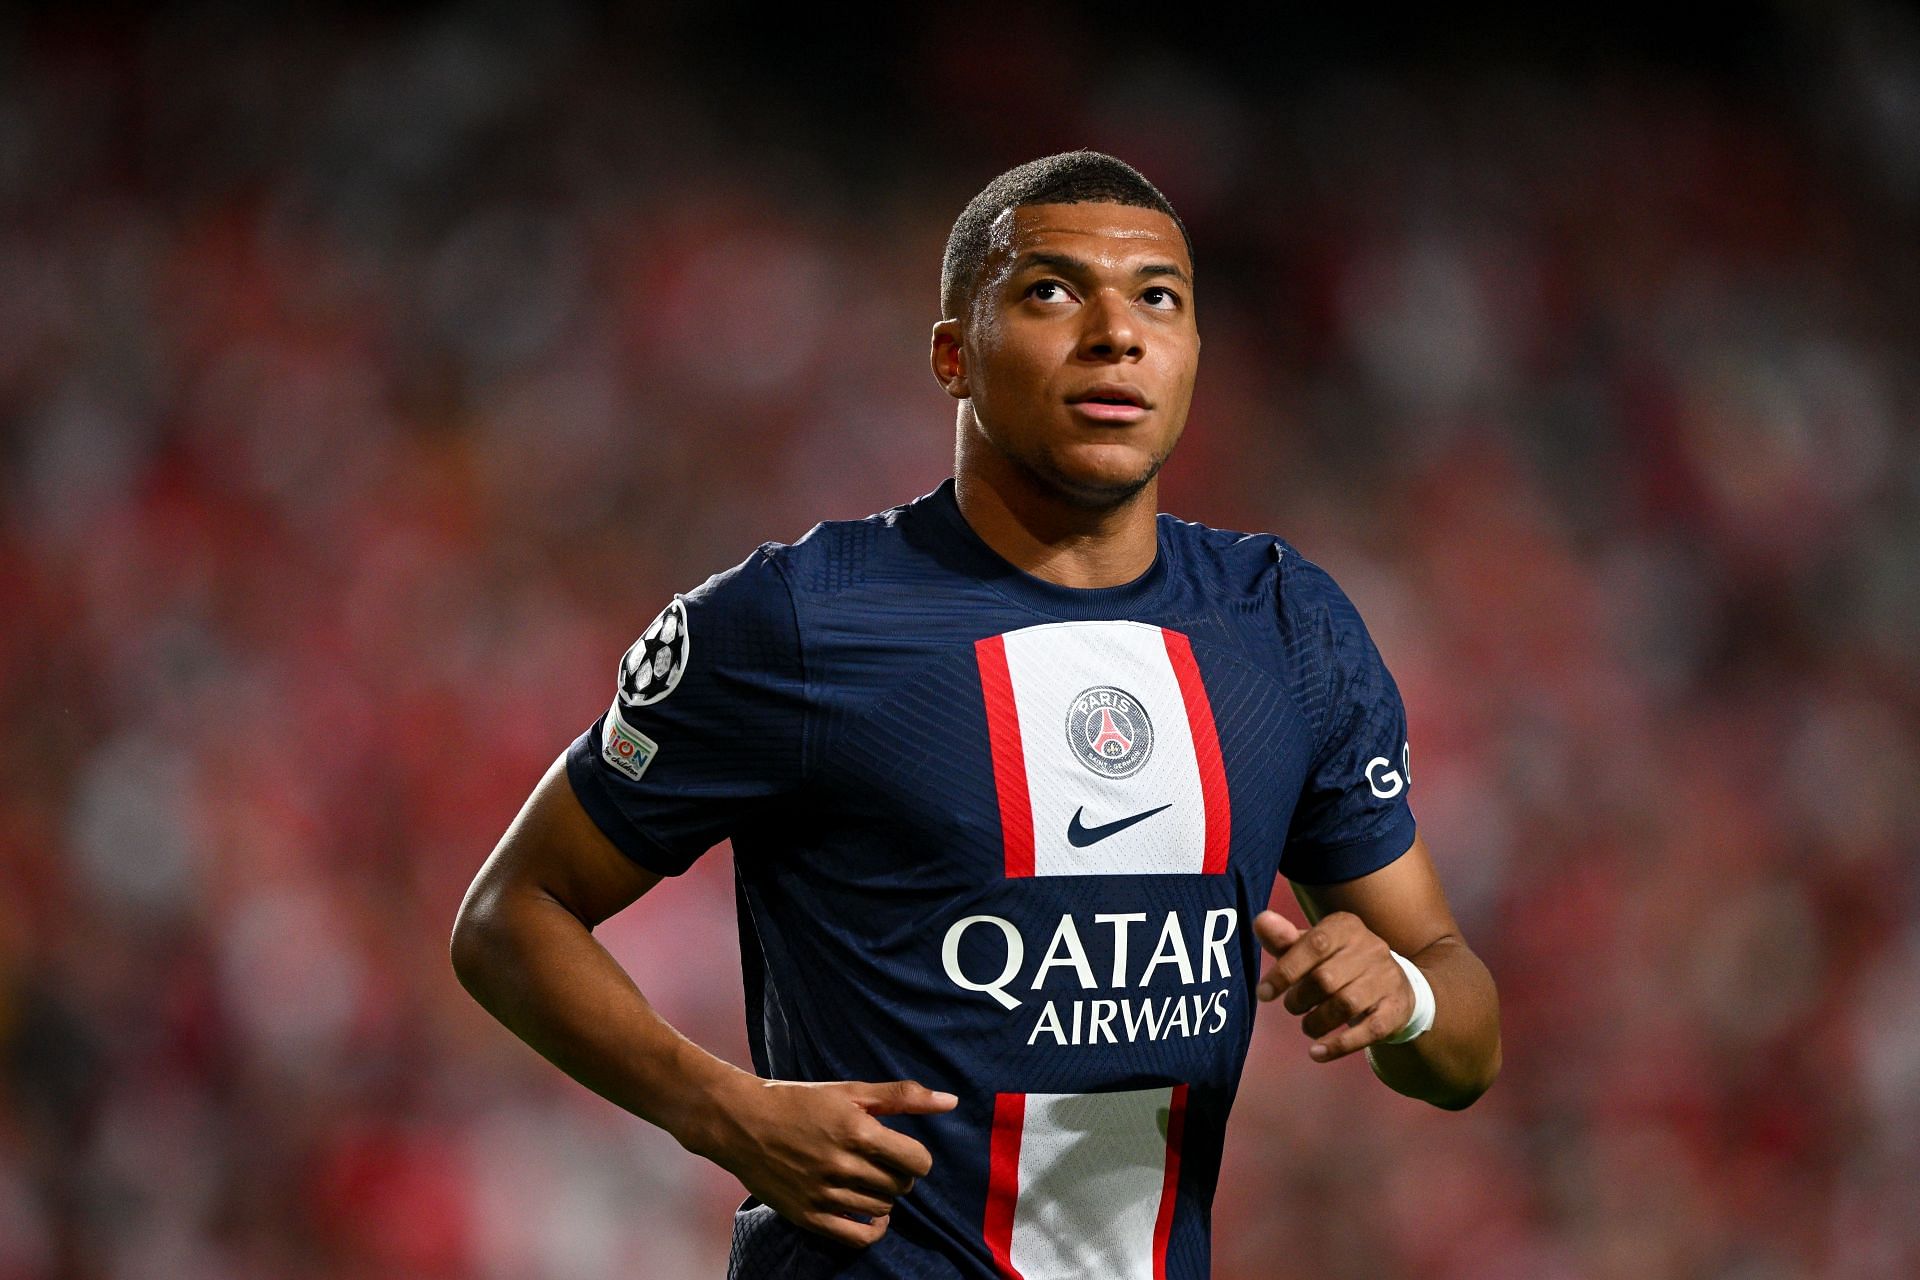 Kylian Mbappe wants to leave Paris next year.